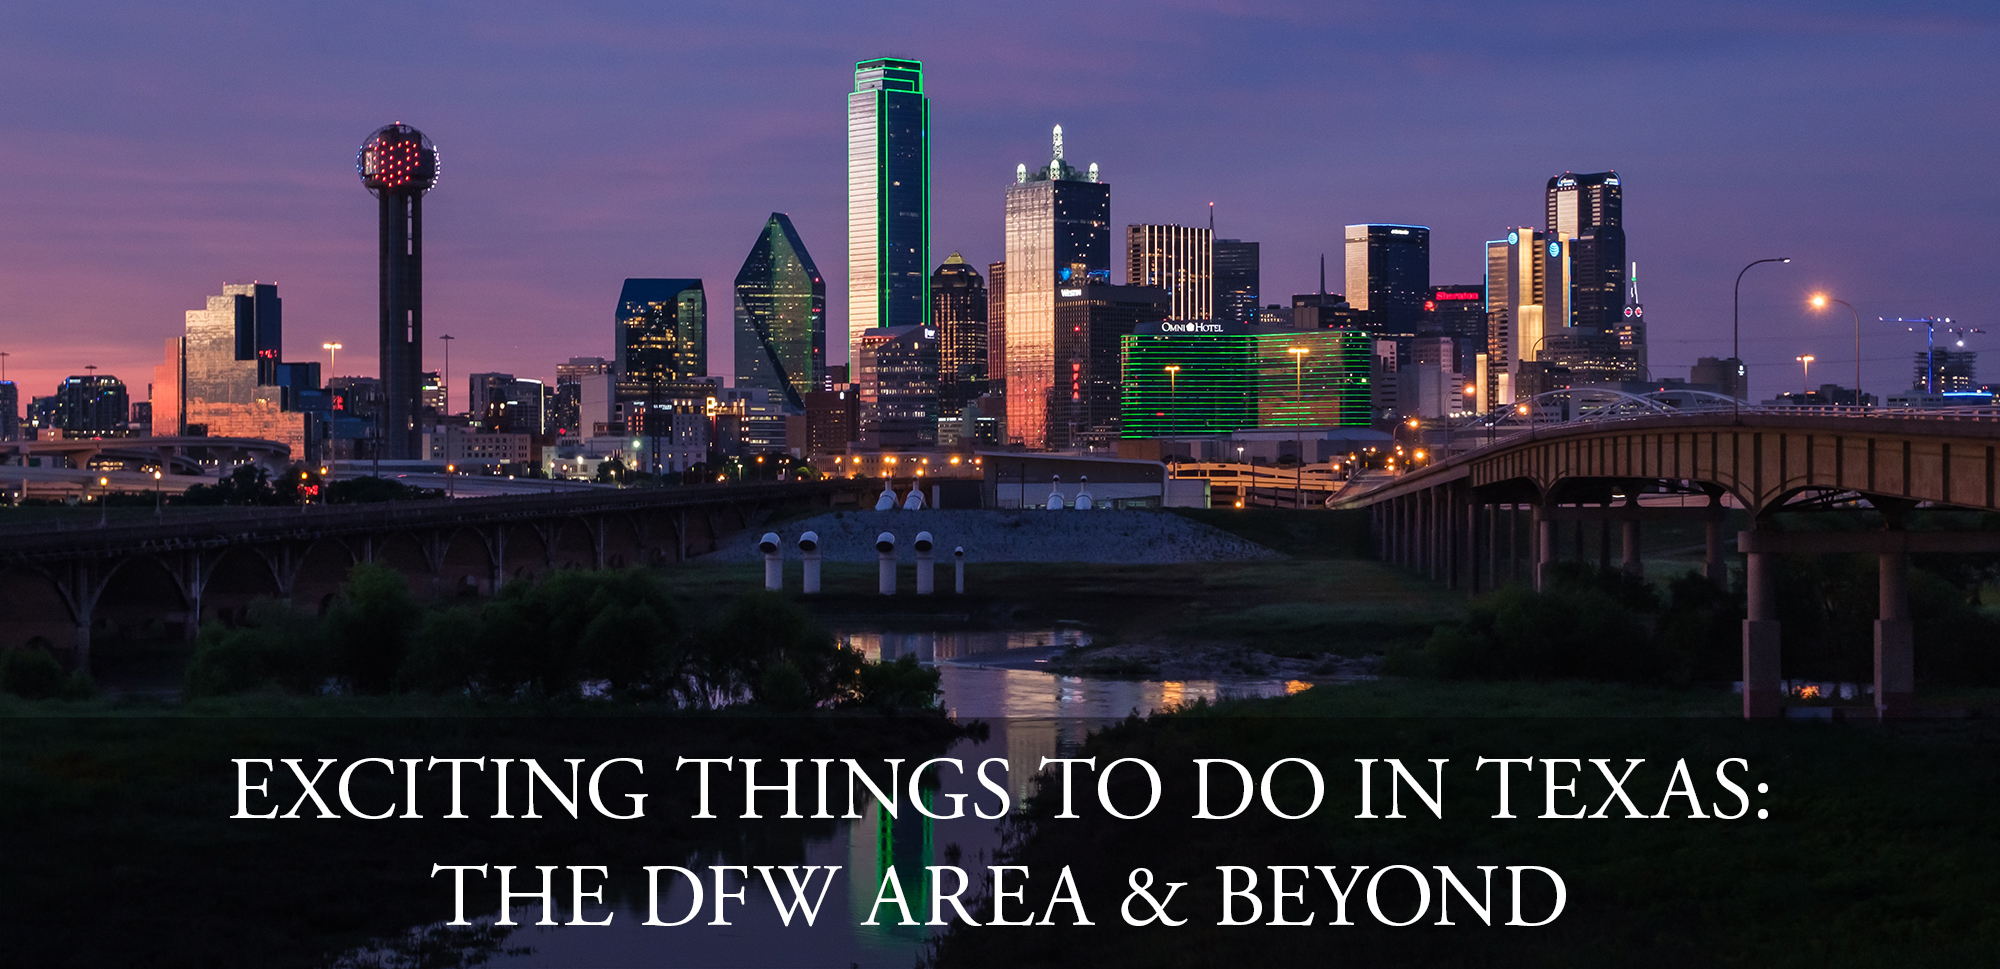 Exciting things to do in Texas: the DFW area and beyond